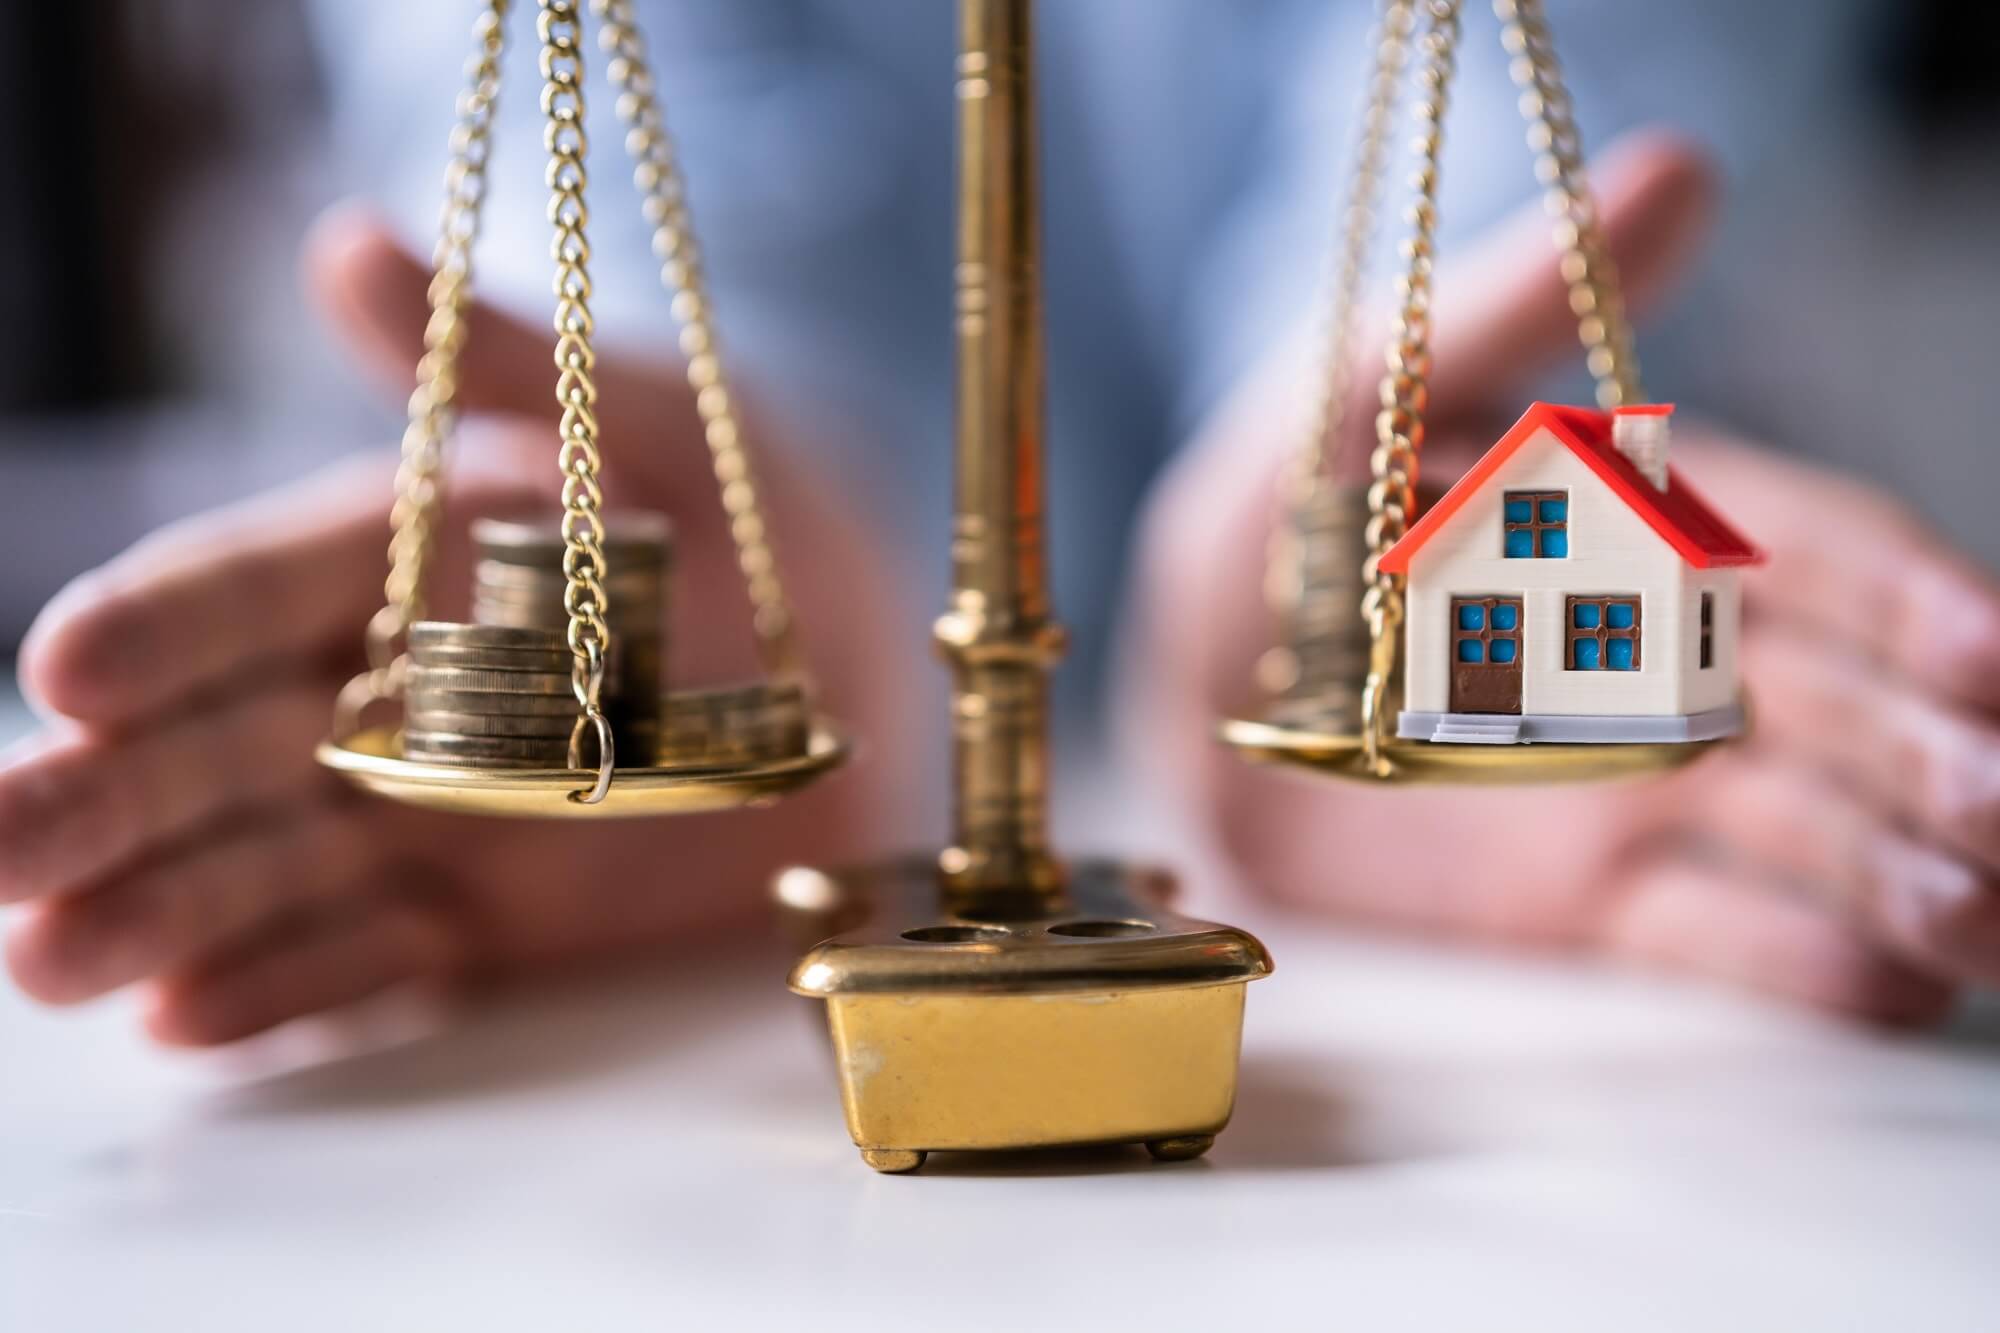 House and money on the scale when dividing assets during divorce.